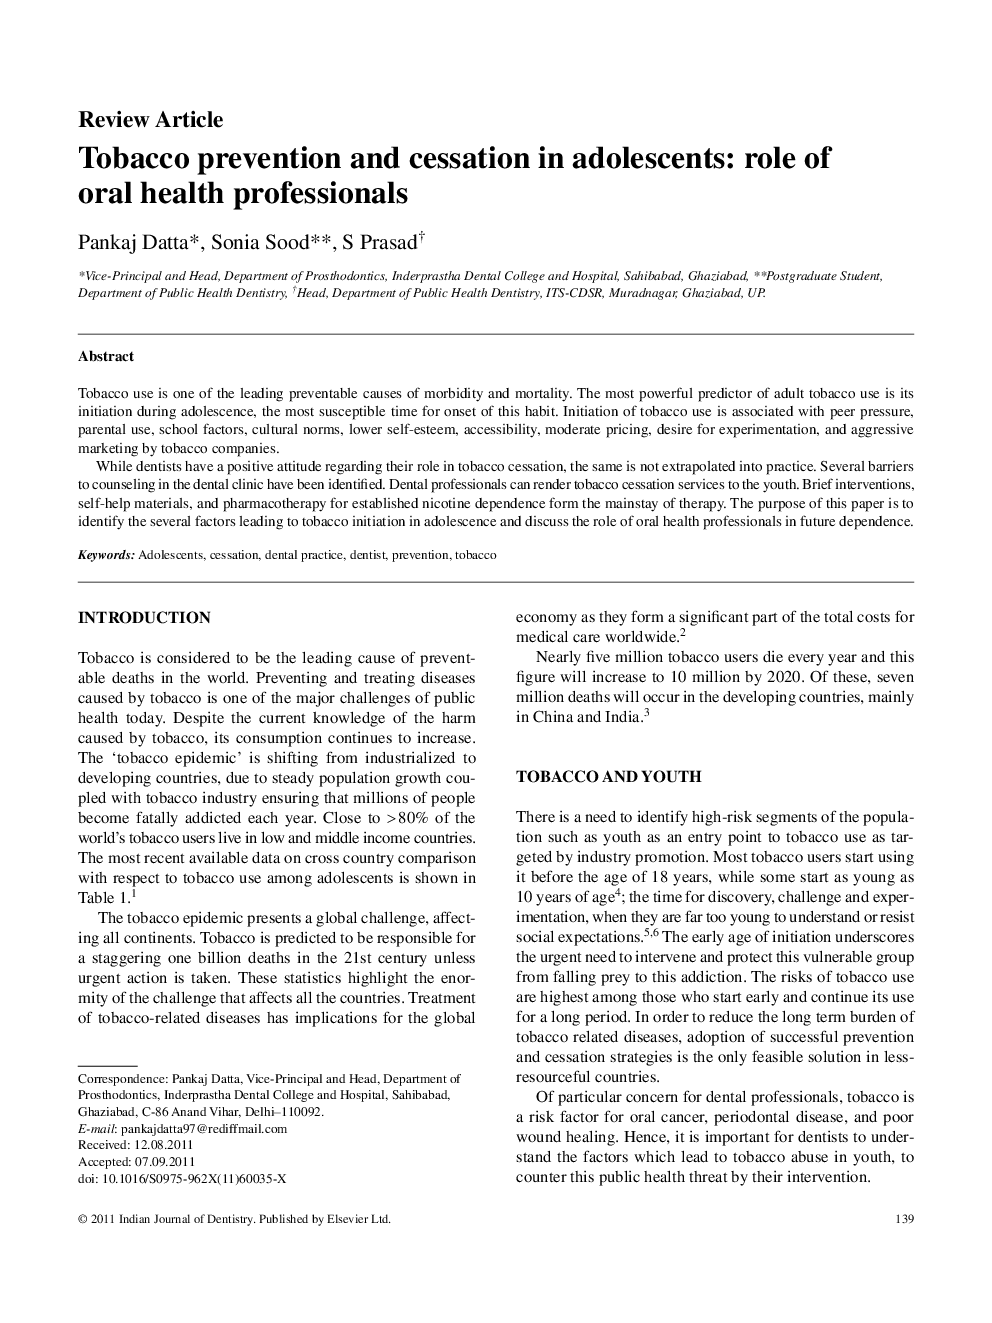 Tobacco prevention and cessation in adolescents: role of oral health professionals